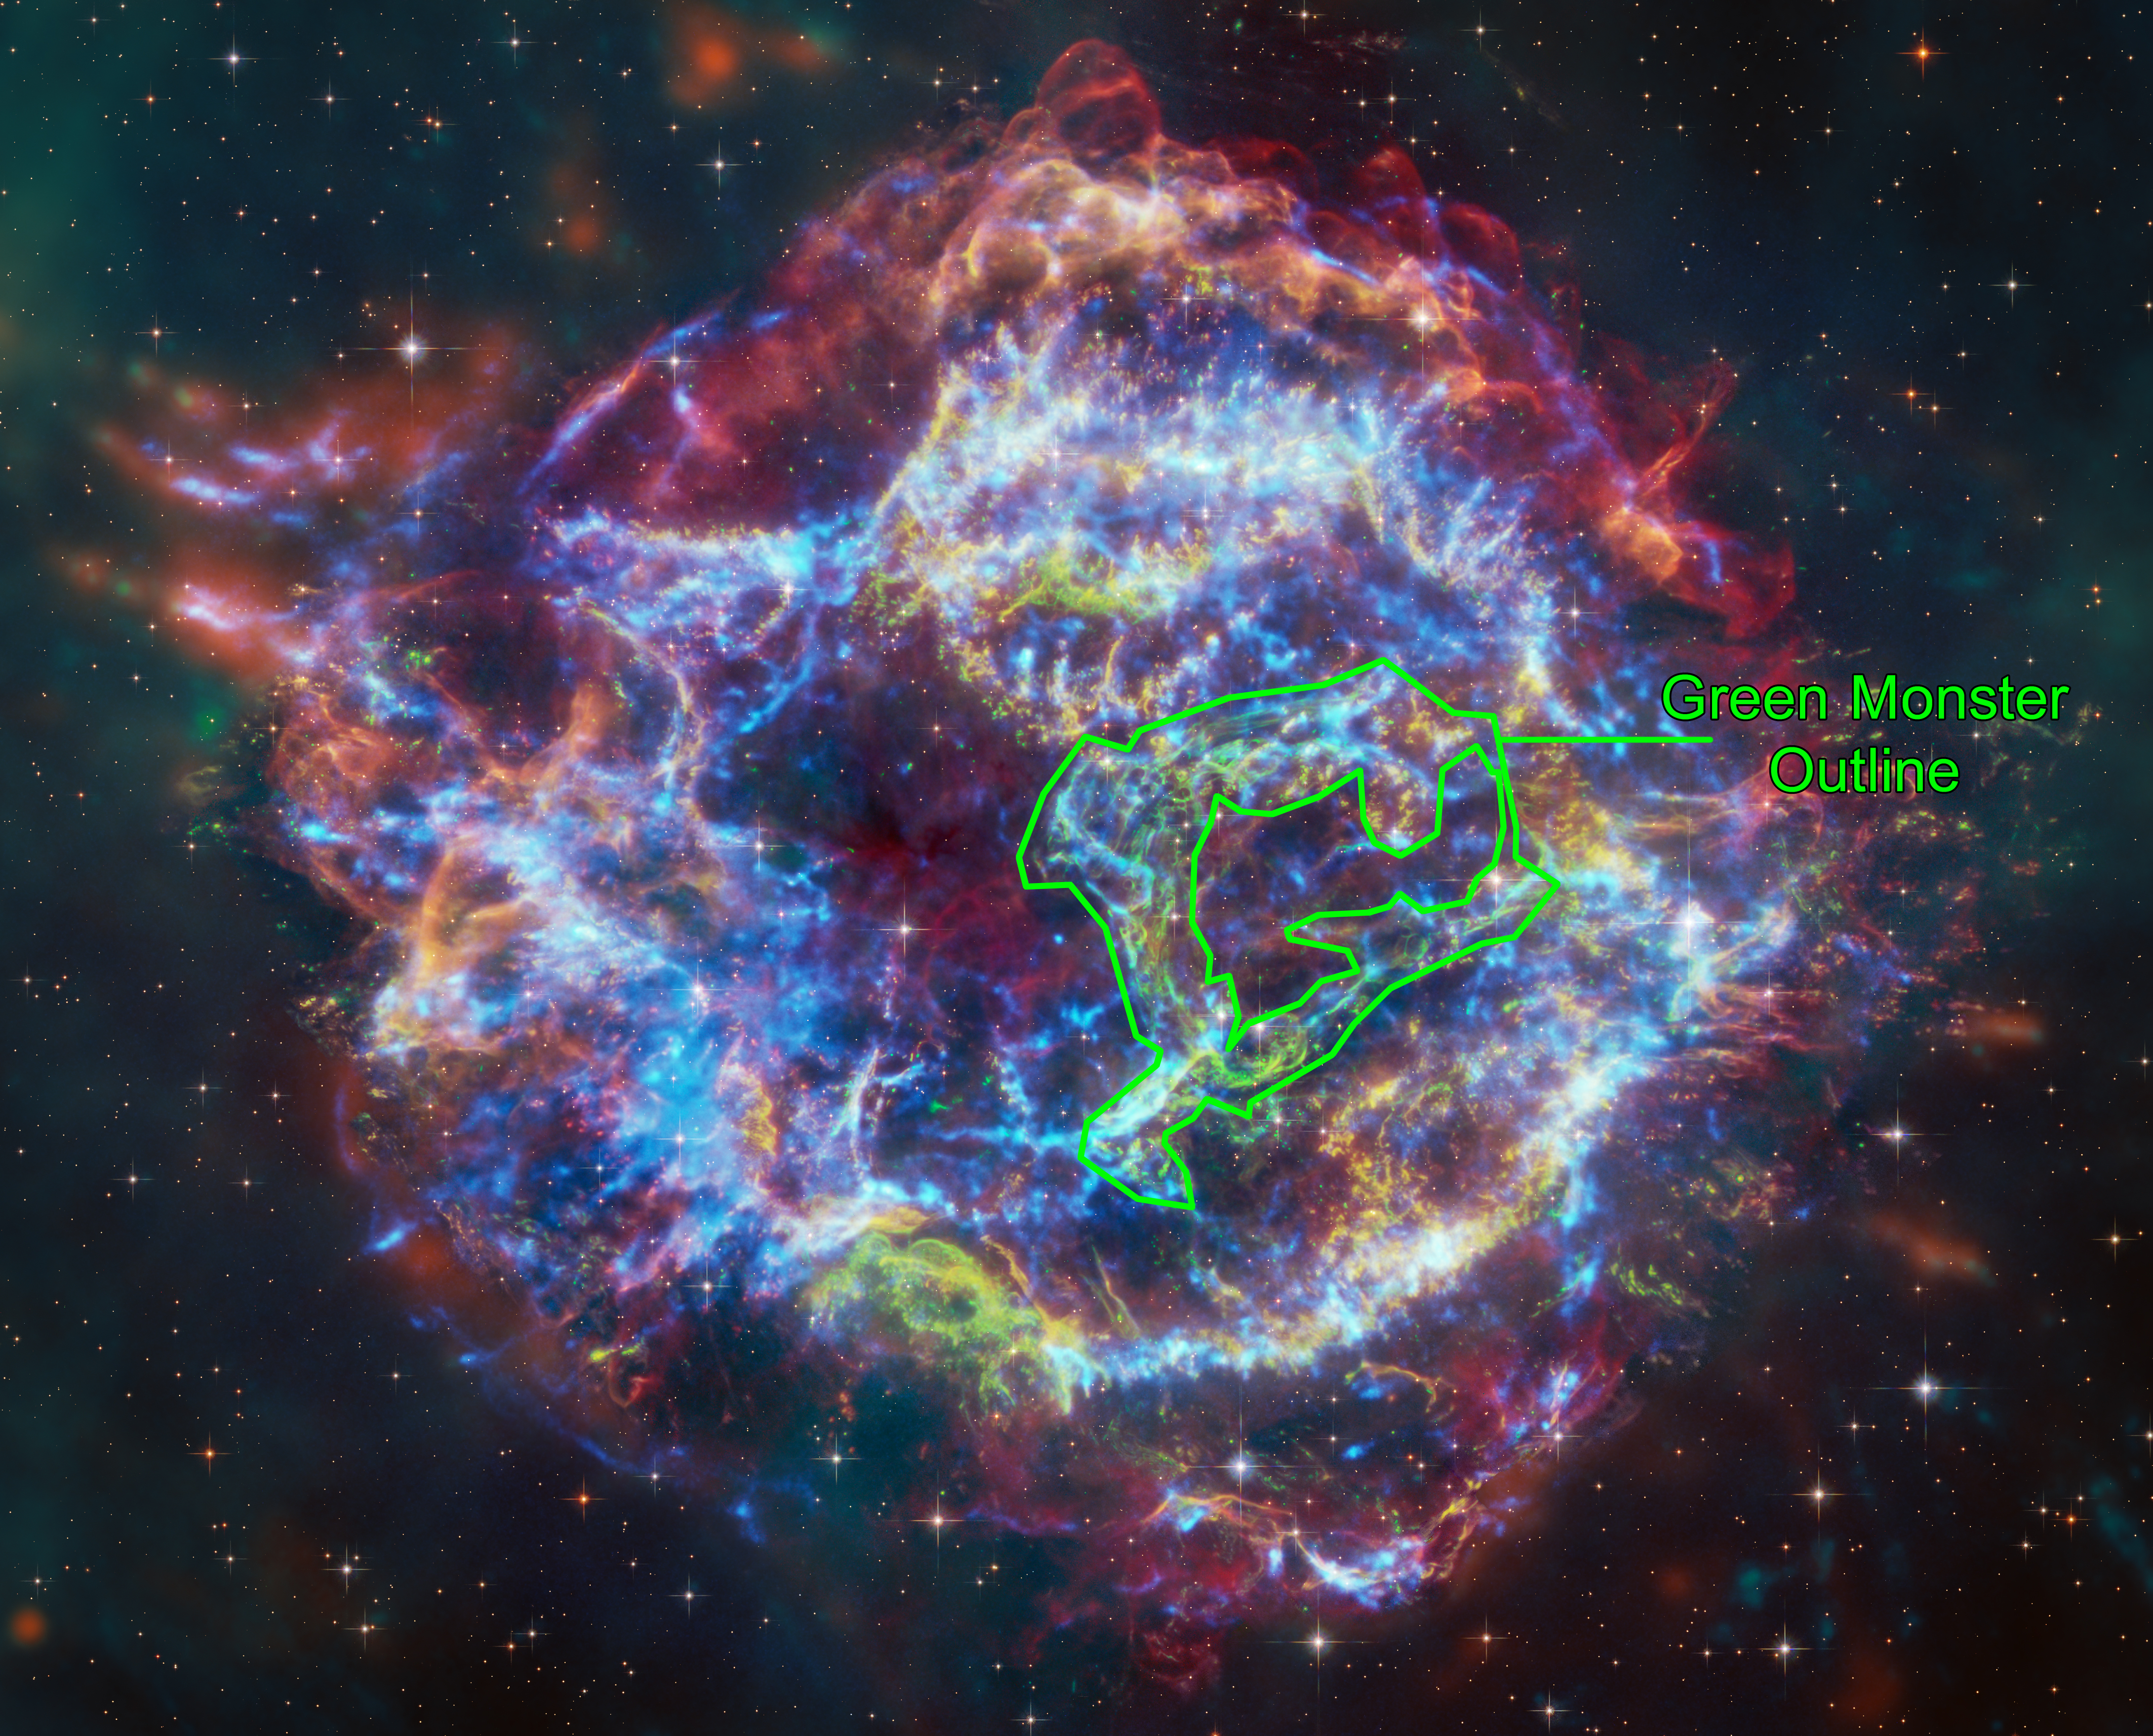 Data from Chandra and Webb of the supernova remnant Cassiopeia A (Cas A) have been combined for the first time, helping to explain an unusual structure within the debris field and address other questions about the supernova explosion that created it. These images show X-rays from Chandra, infrared data from Webb and Spitzer, and optical data from Hubble. Astronomers using these data found that the so-called Green Monster near the center of Cas A was created by a blast wave from the exploded star slamming into material surrounding it.